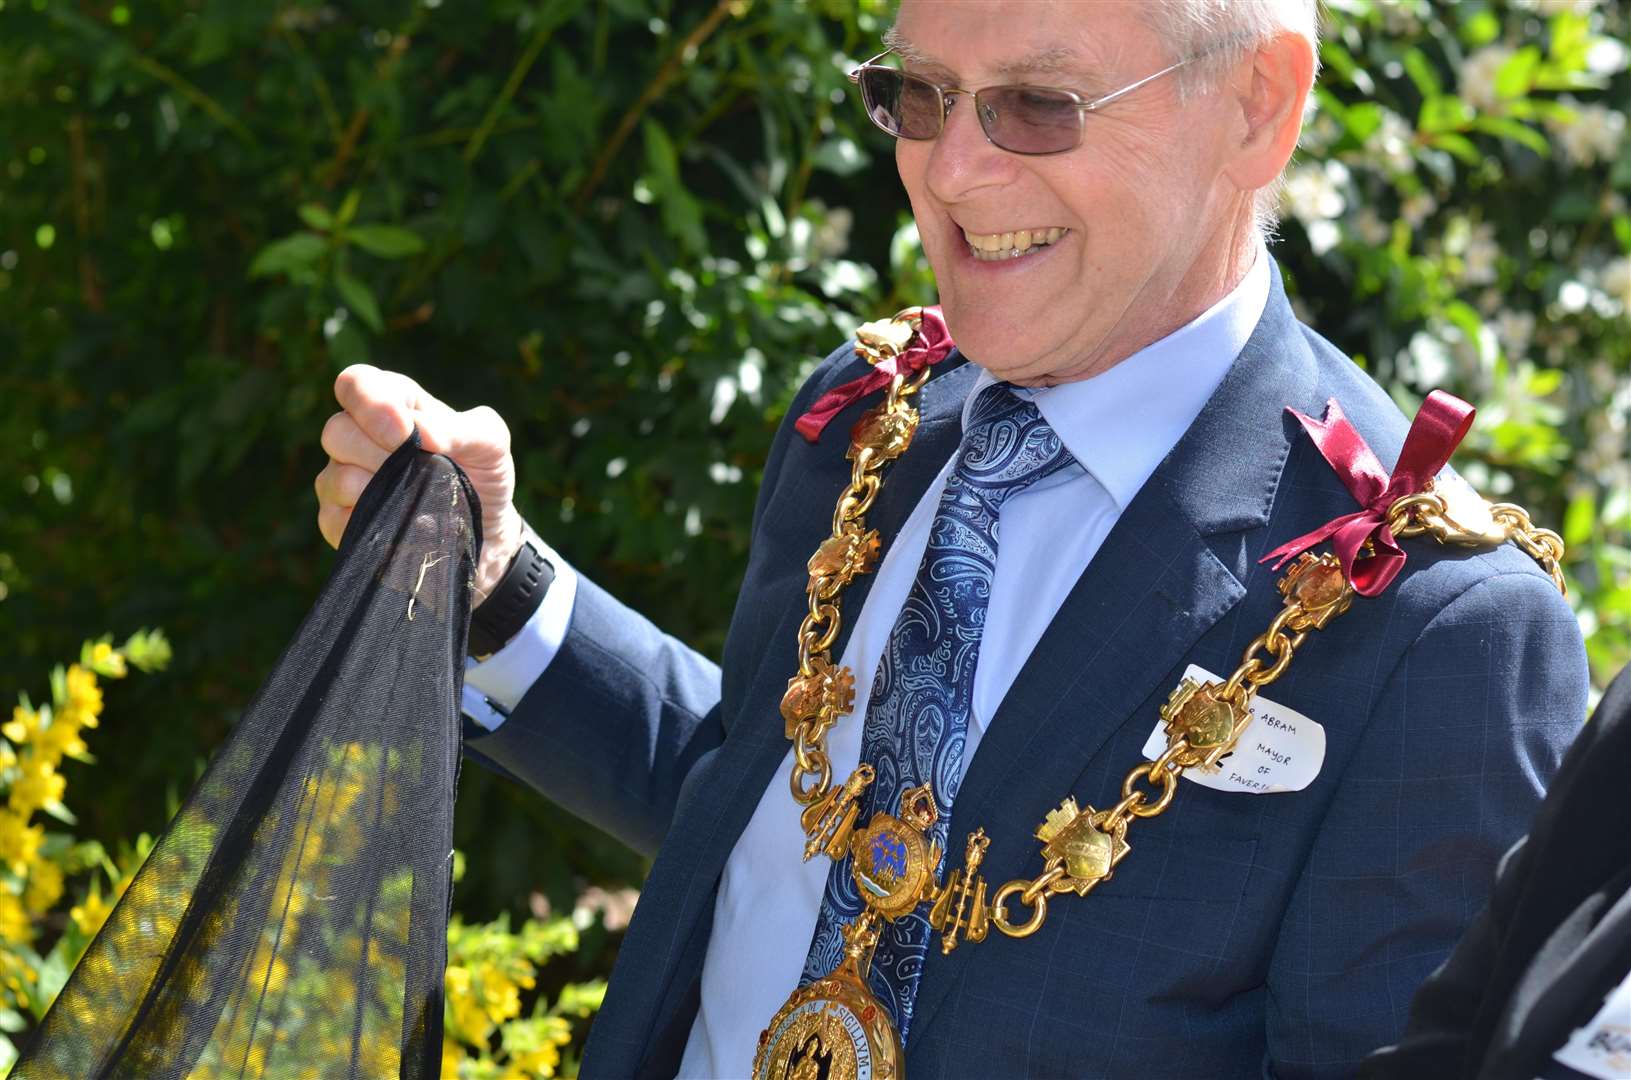 Mayor of Faversham Trevor Abrams at the Making a Buzz for the Coast celebration event